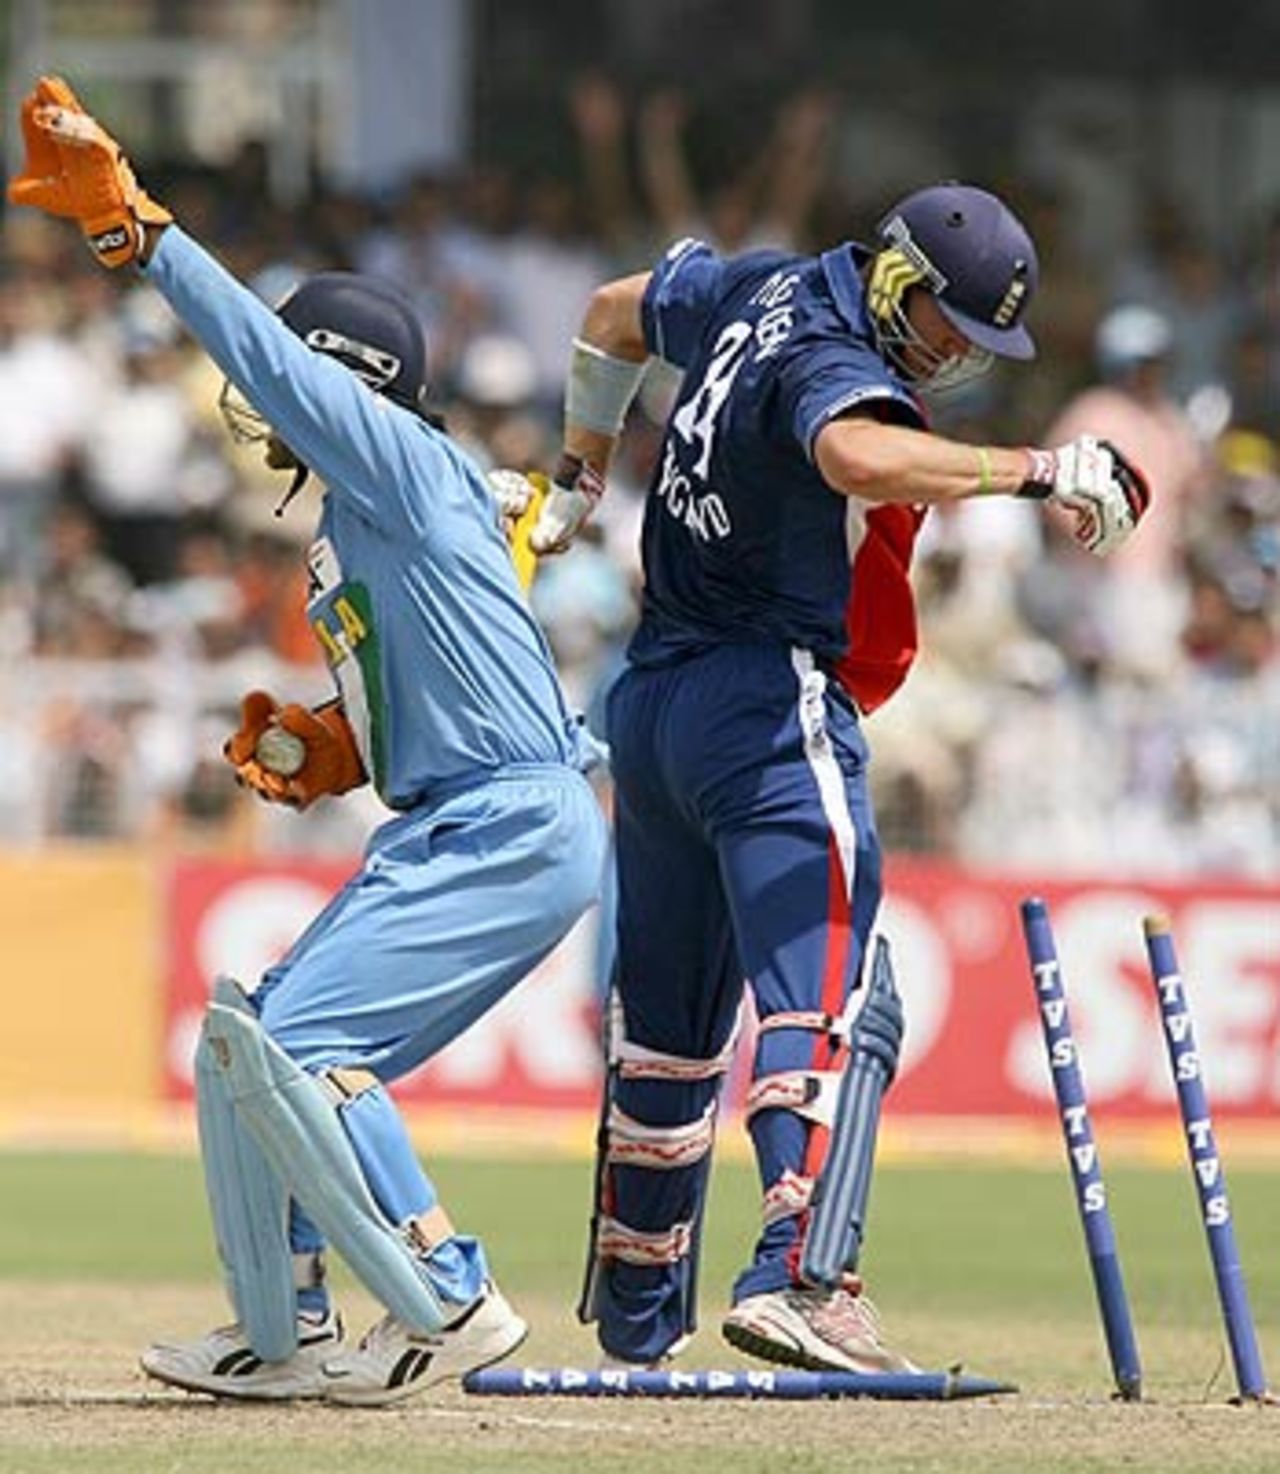 Mahendra Singh Dhoni makes an unsuccessful stumping against Kevin Pietersen, India v England, 2nd ODI, Faridabad, March 31, 2006